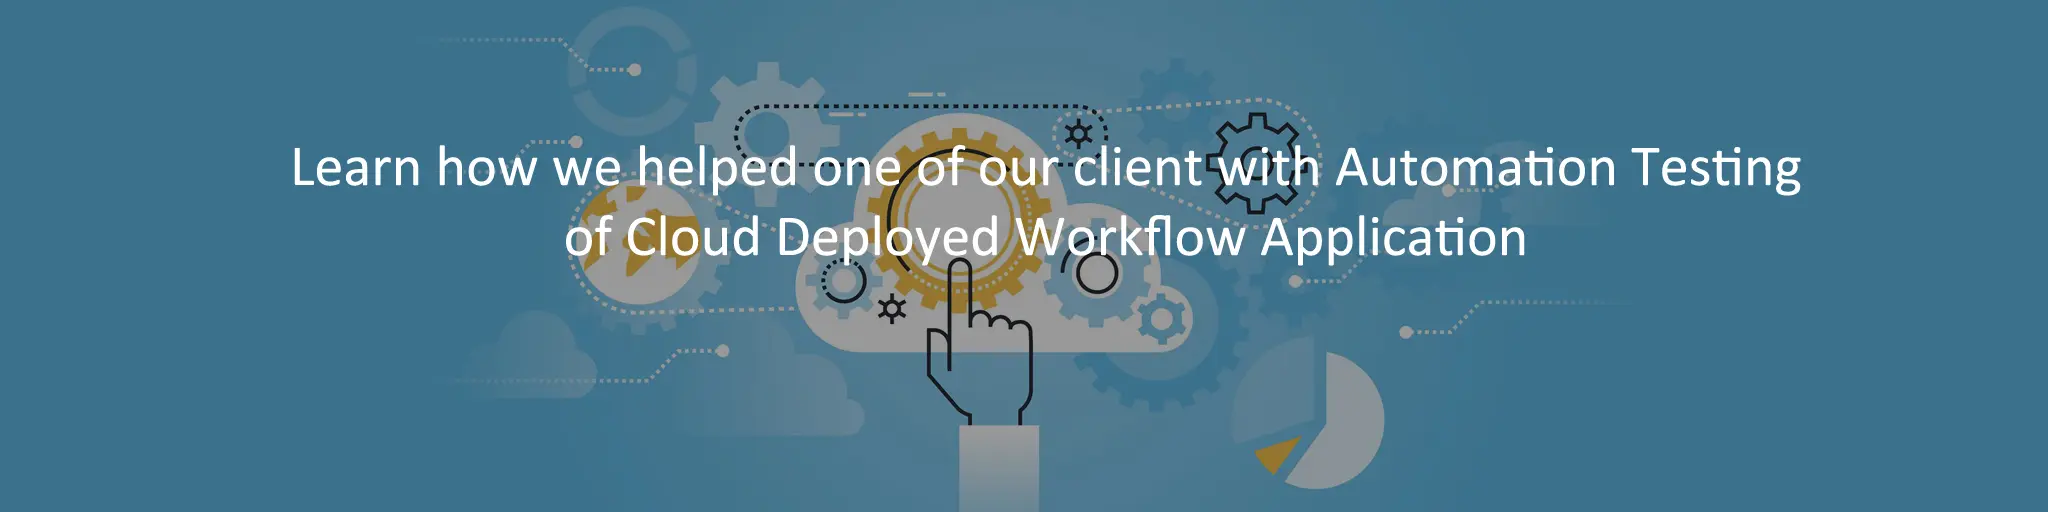 Learn how we helped one of our client with Automation Testing of Cloud Deployed Workflow Application